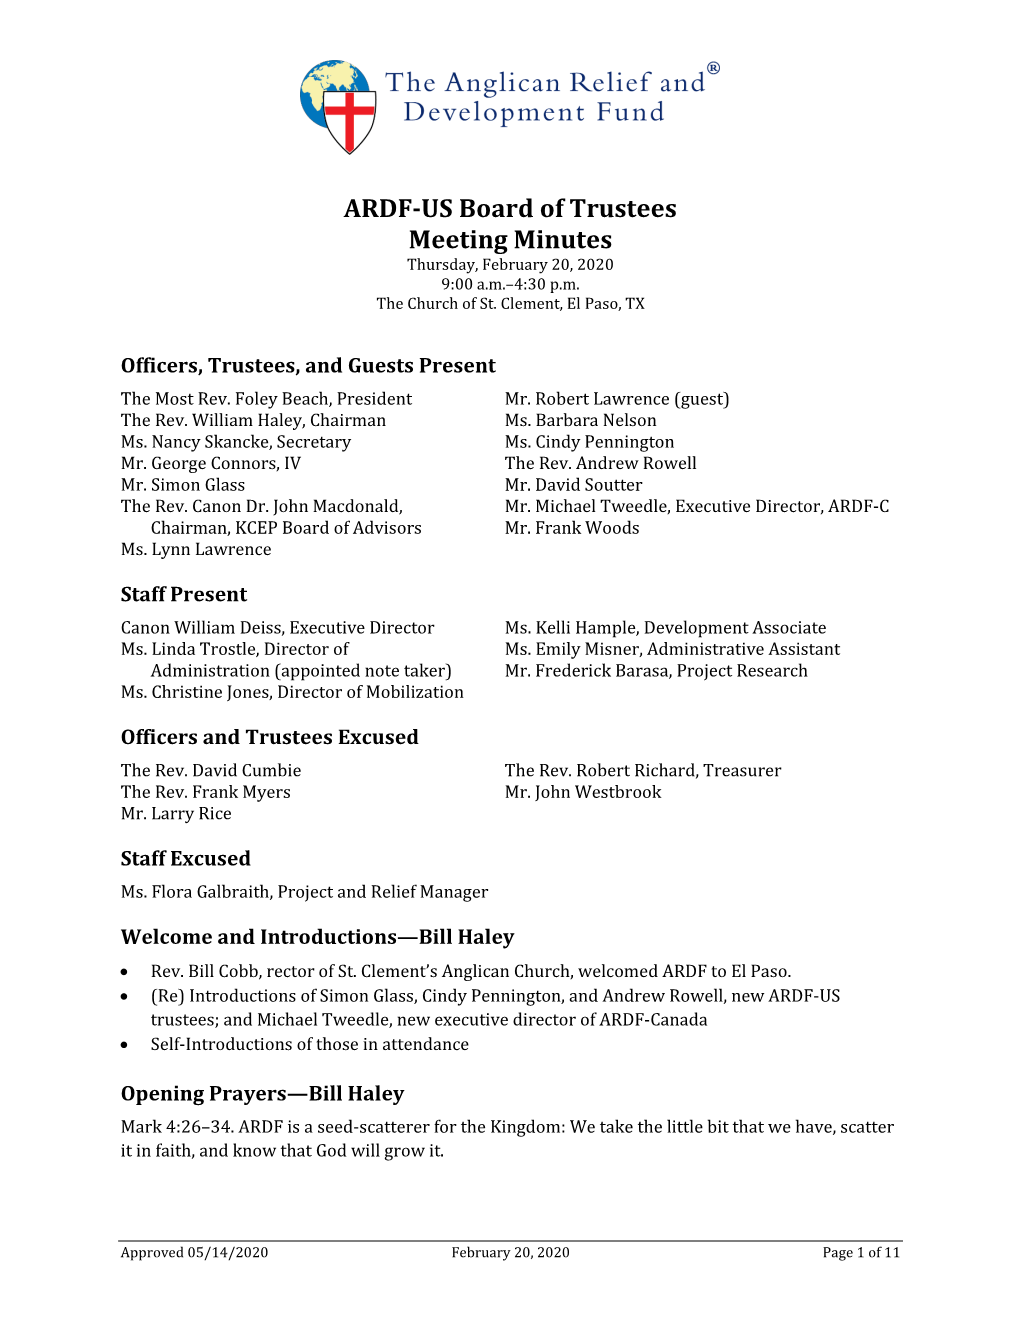 ARDF-US Board of Trustees Meeting Minutes Thursday, February 20, 2020 9:00 A.M.–4:30 P.M